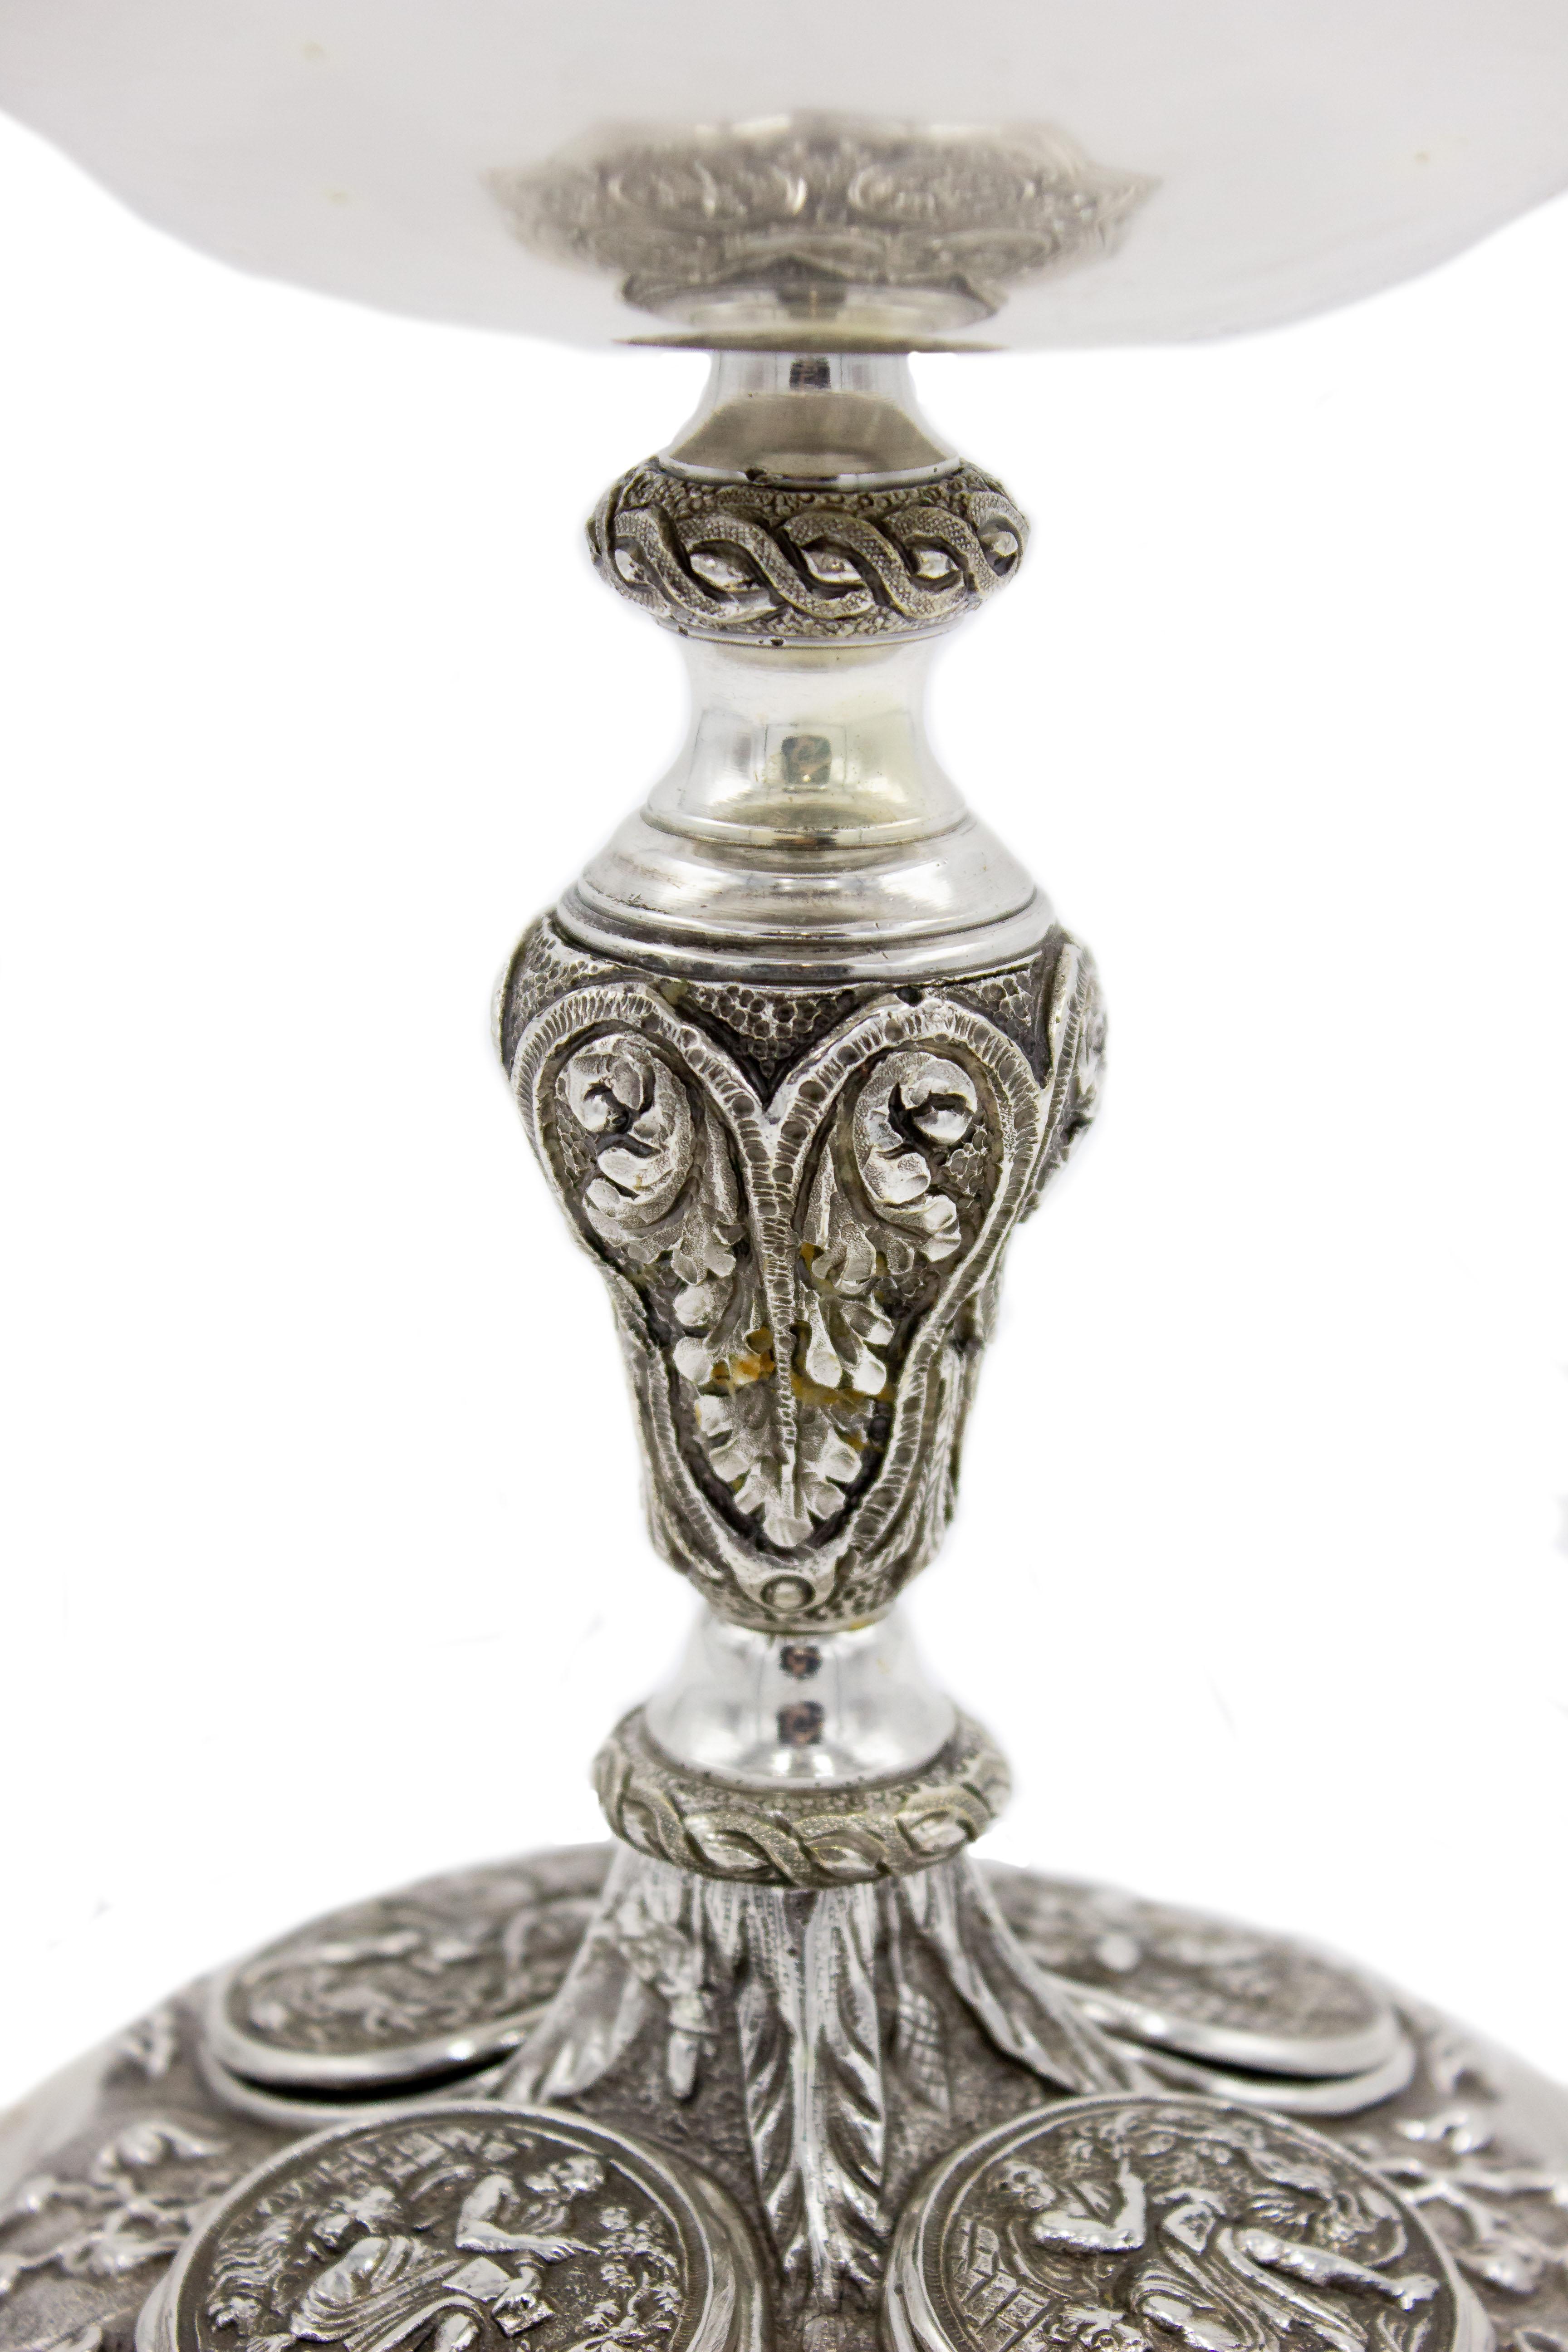 Pairof Italian Renaissance-style (19th century) silver plate ceremonial chalice cups with 4 medallions on shaped base (priced as pair).
 